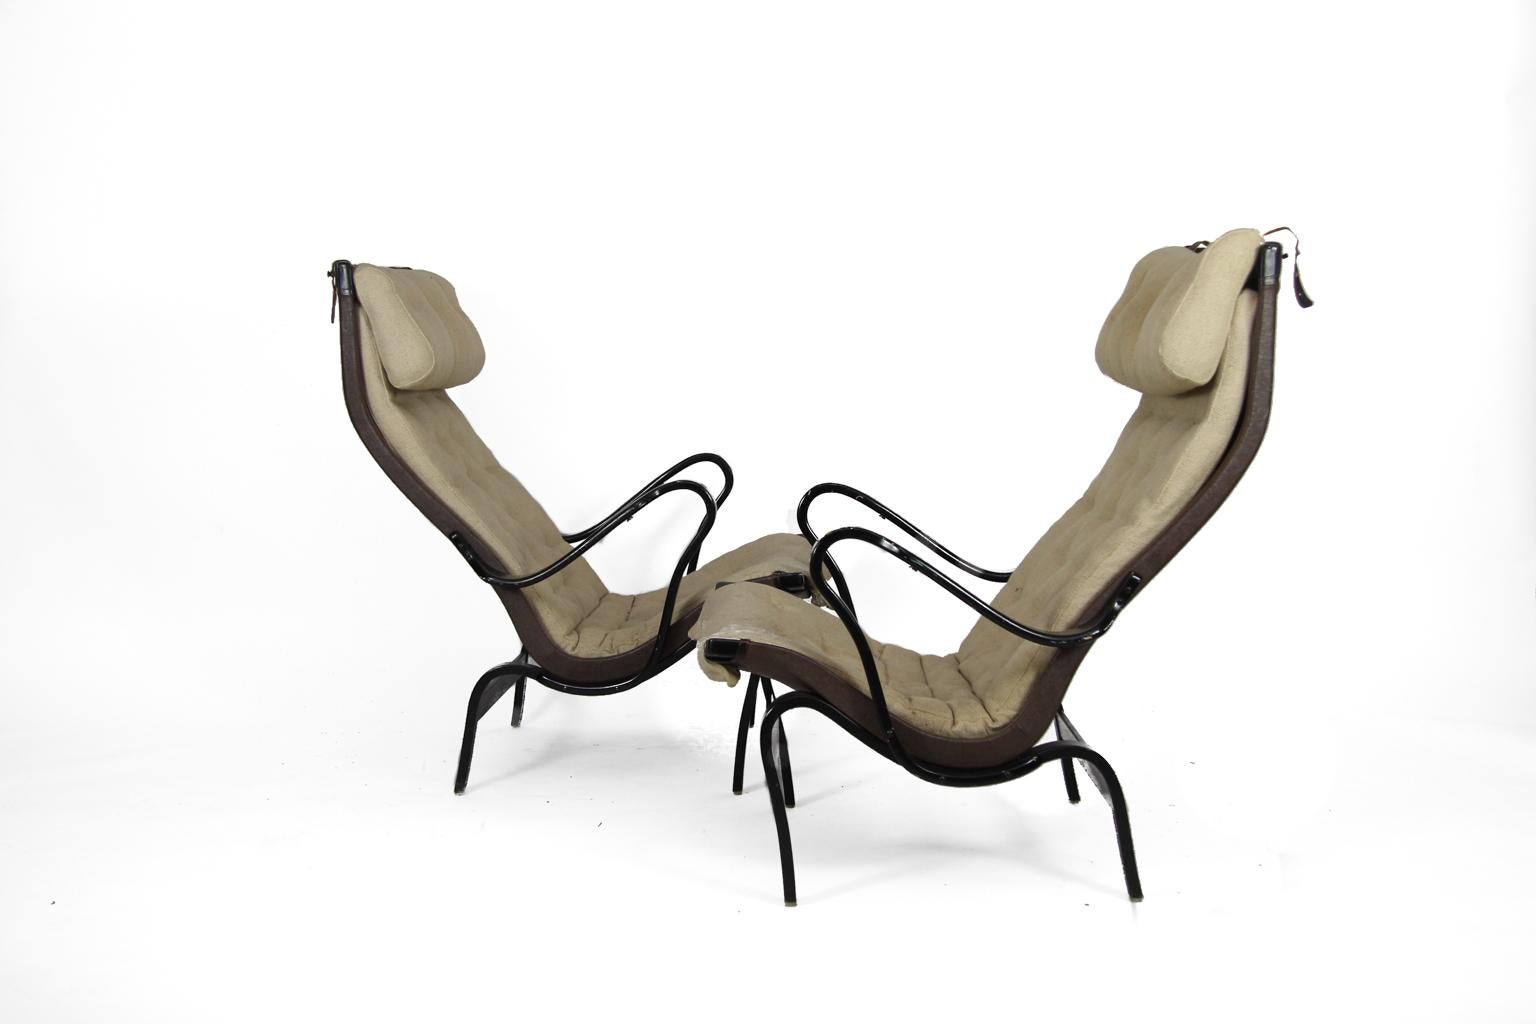 Wonderful pair of two lounge chairs Pernilla in original black, designed by Bruno Mathsson in the 1970s, produced by DUX. All marked under seat. Bases in molded birch and with original upholstery.
Upholstery needs refreshing or made new, price